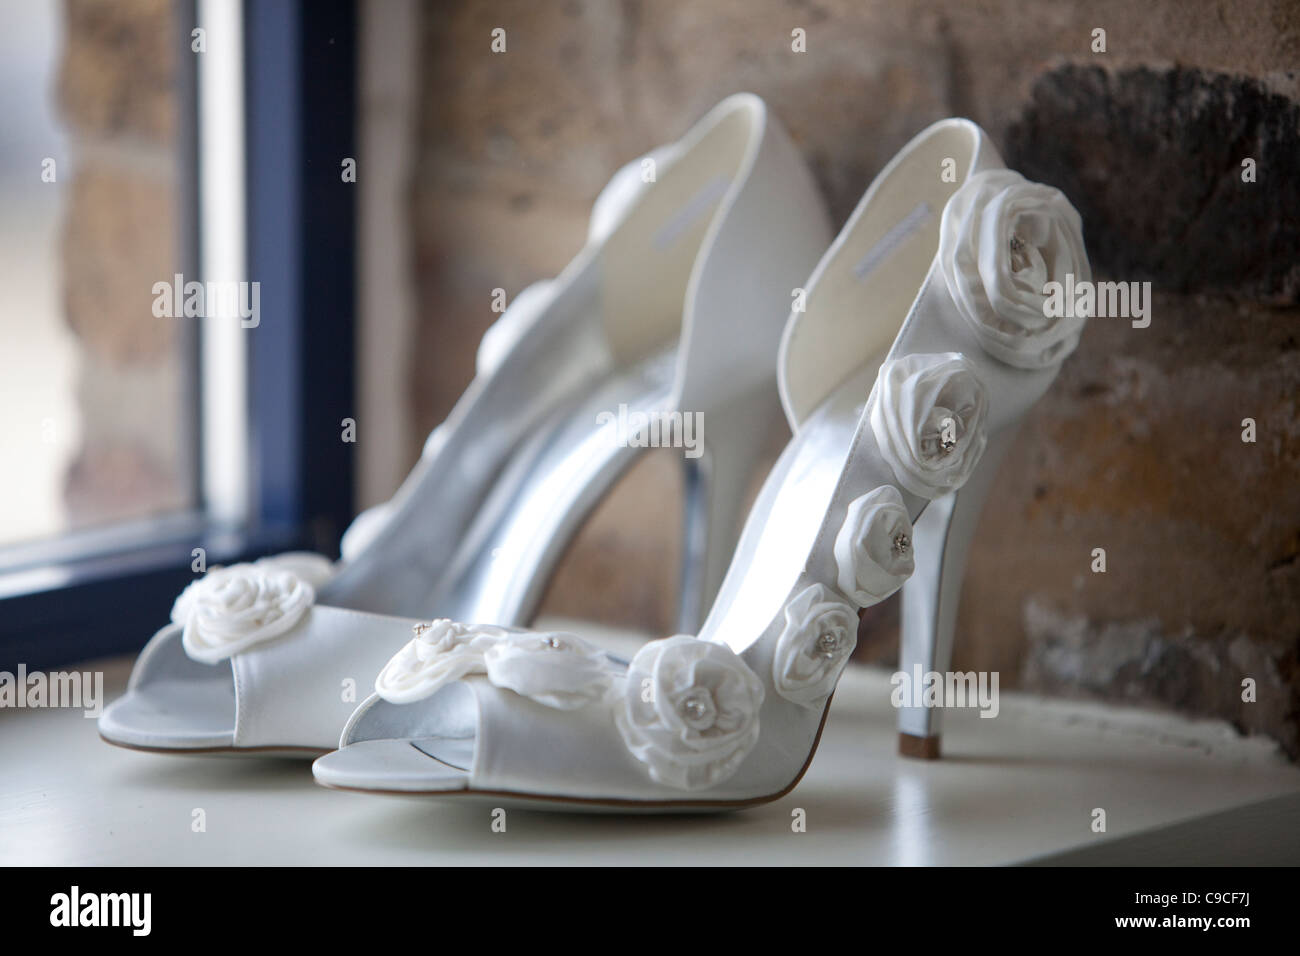 White wedding shoes with roses on 